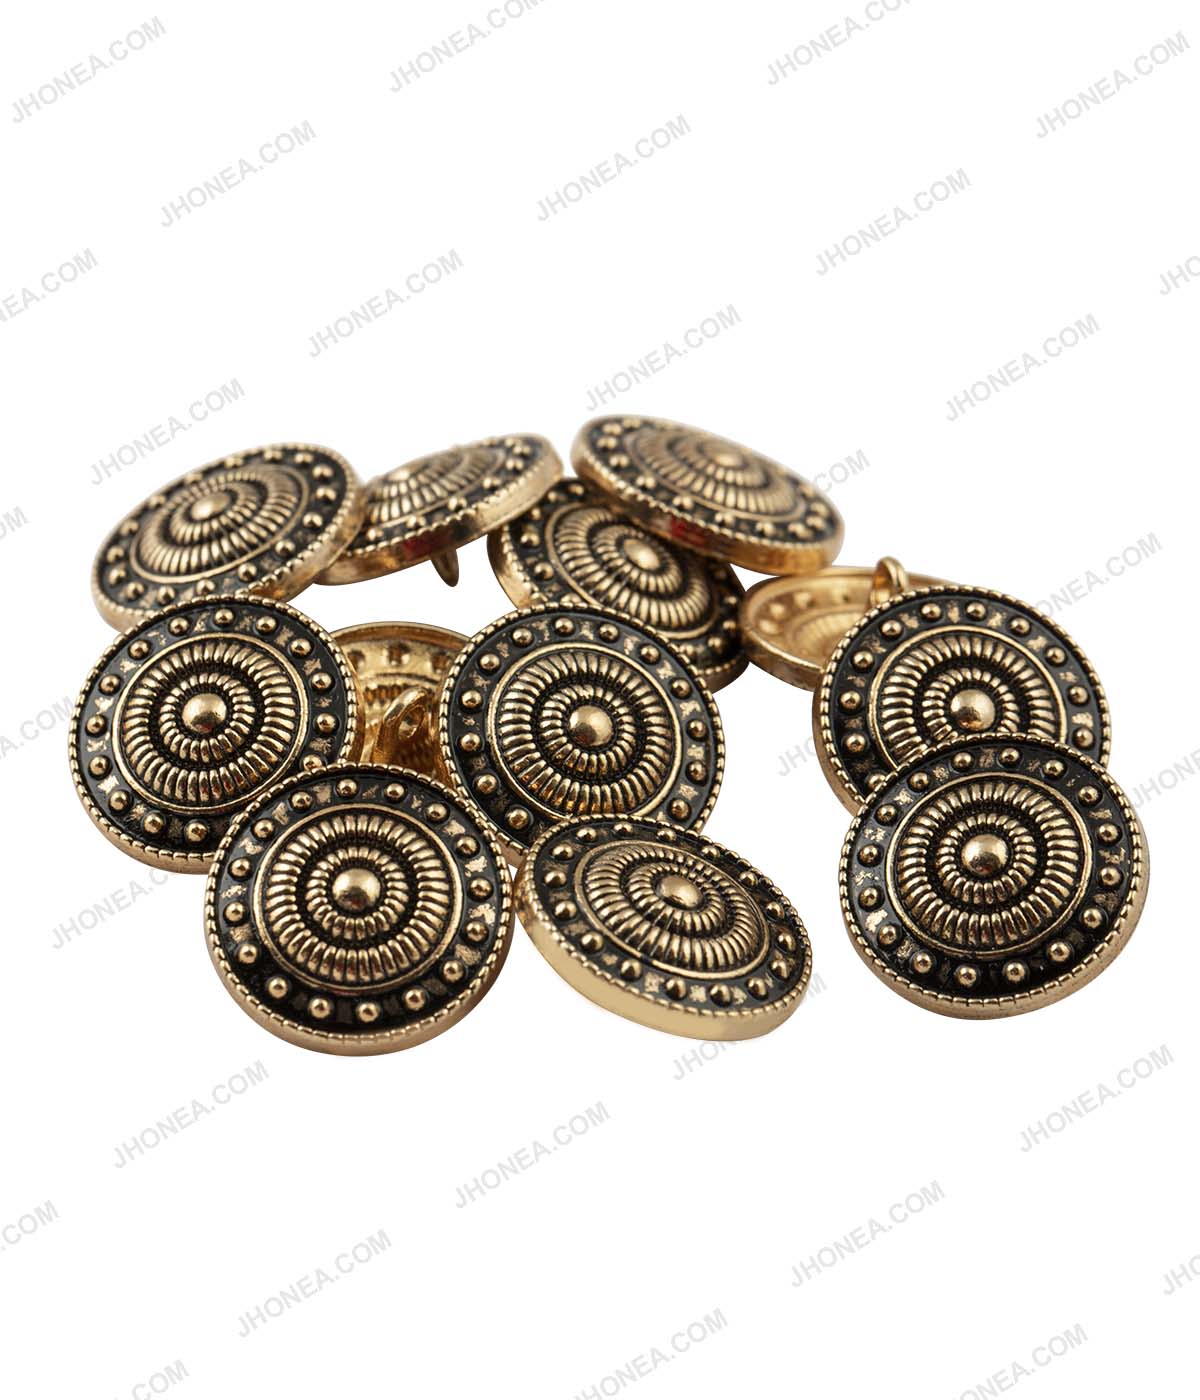 Vintage Looking Antique Gold Ethnic Buttons